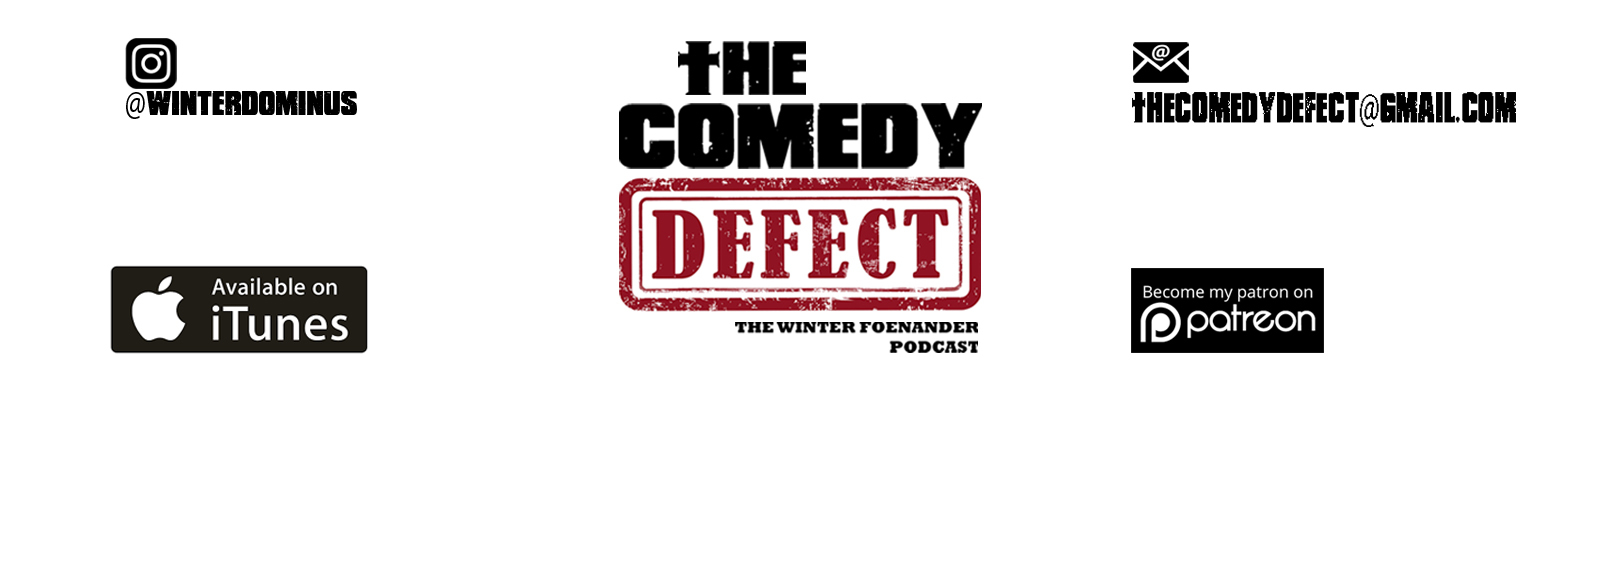 The Comedy Defect